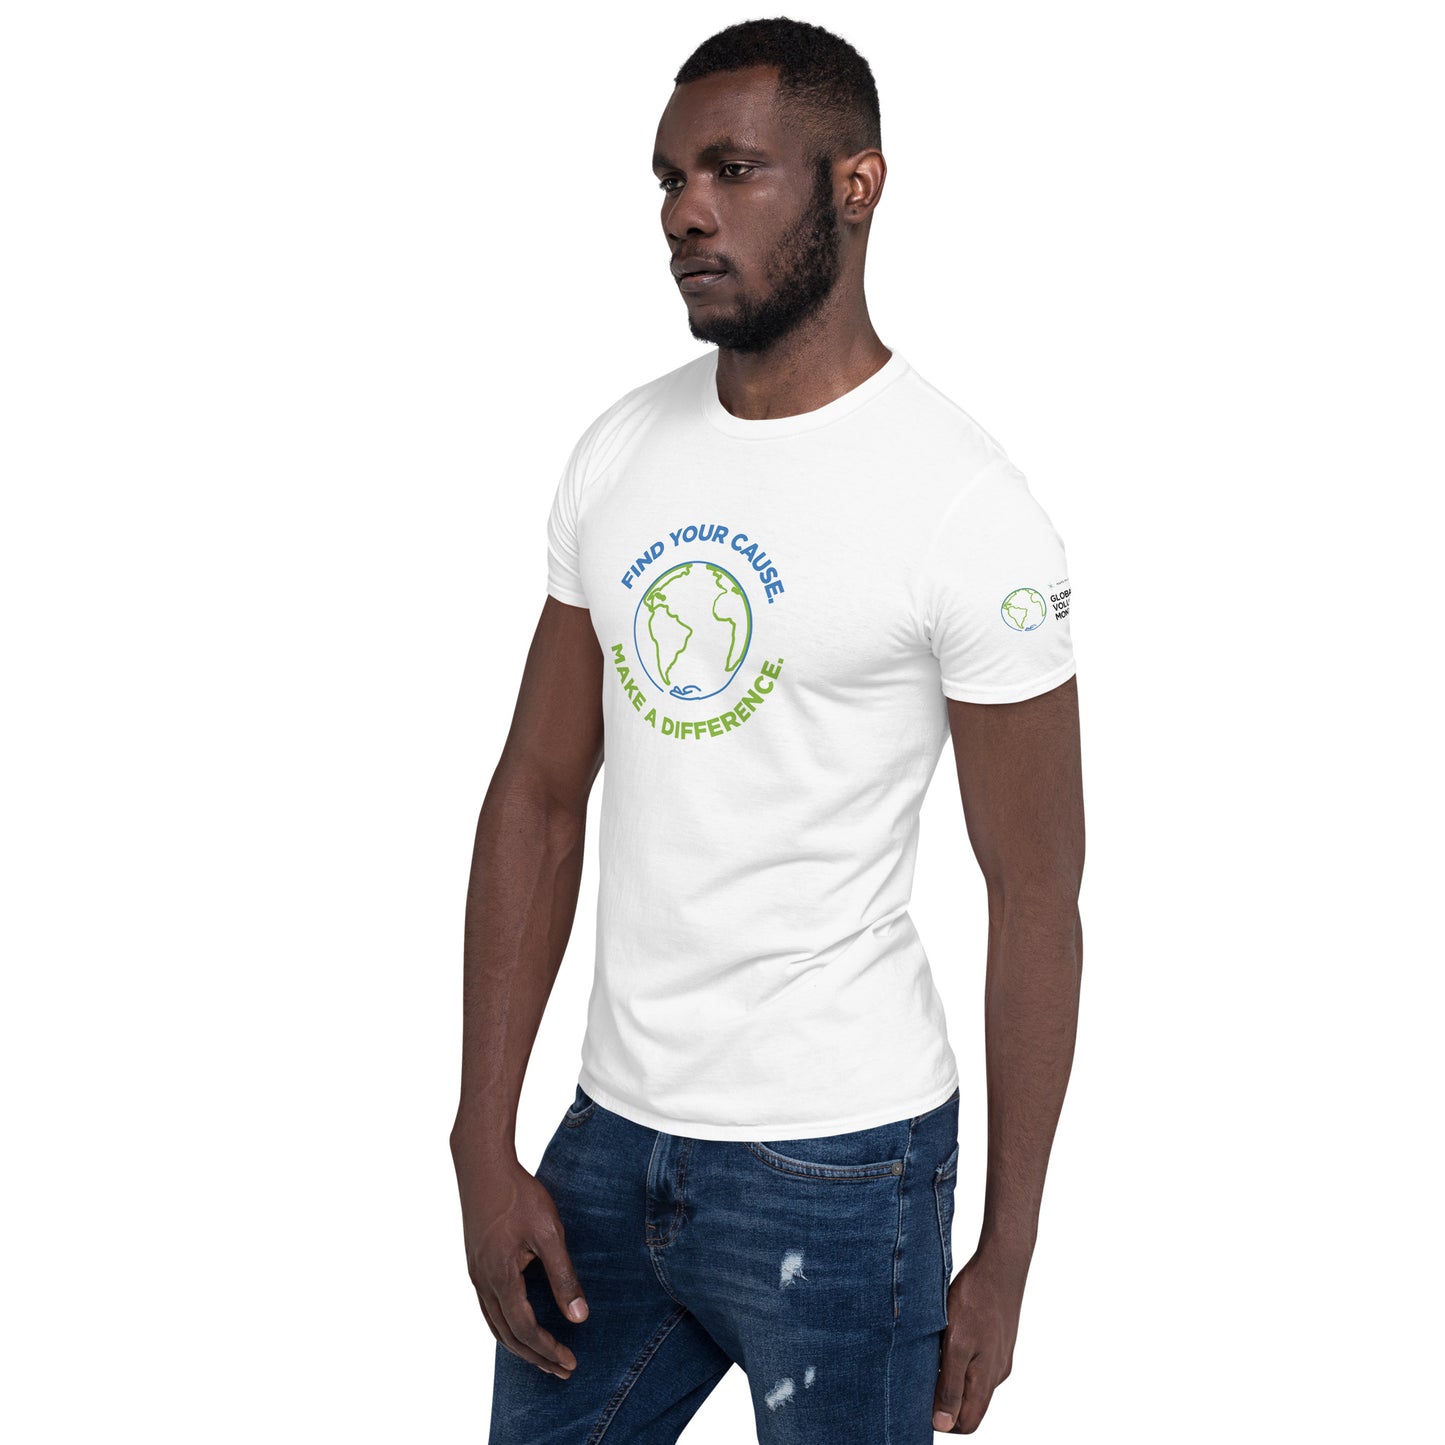 "Find Your Cause..." GVM Short-Sleeve Unisex T-Shirt